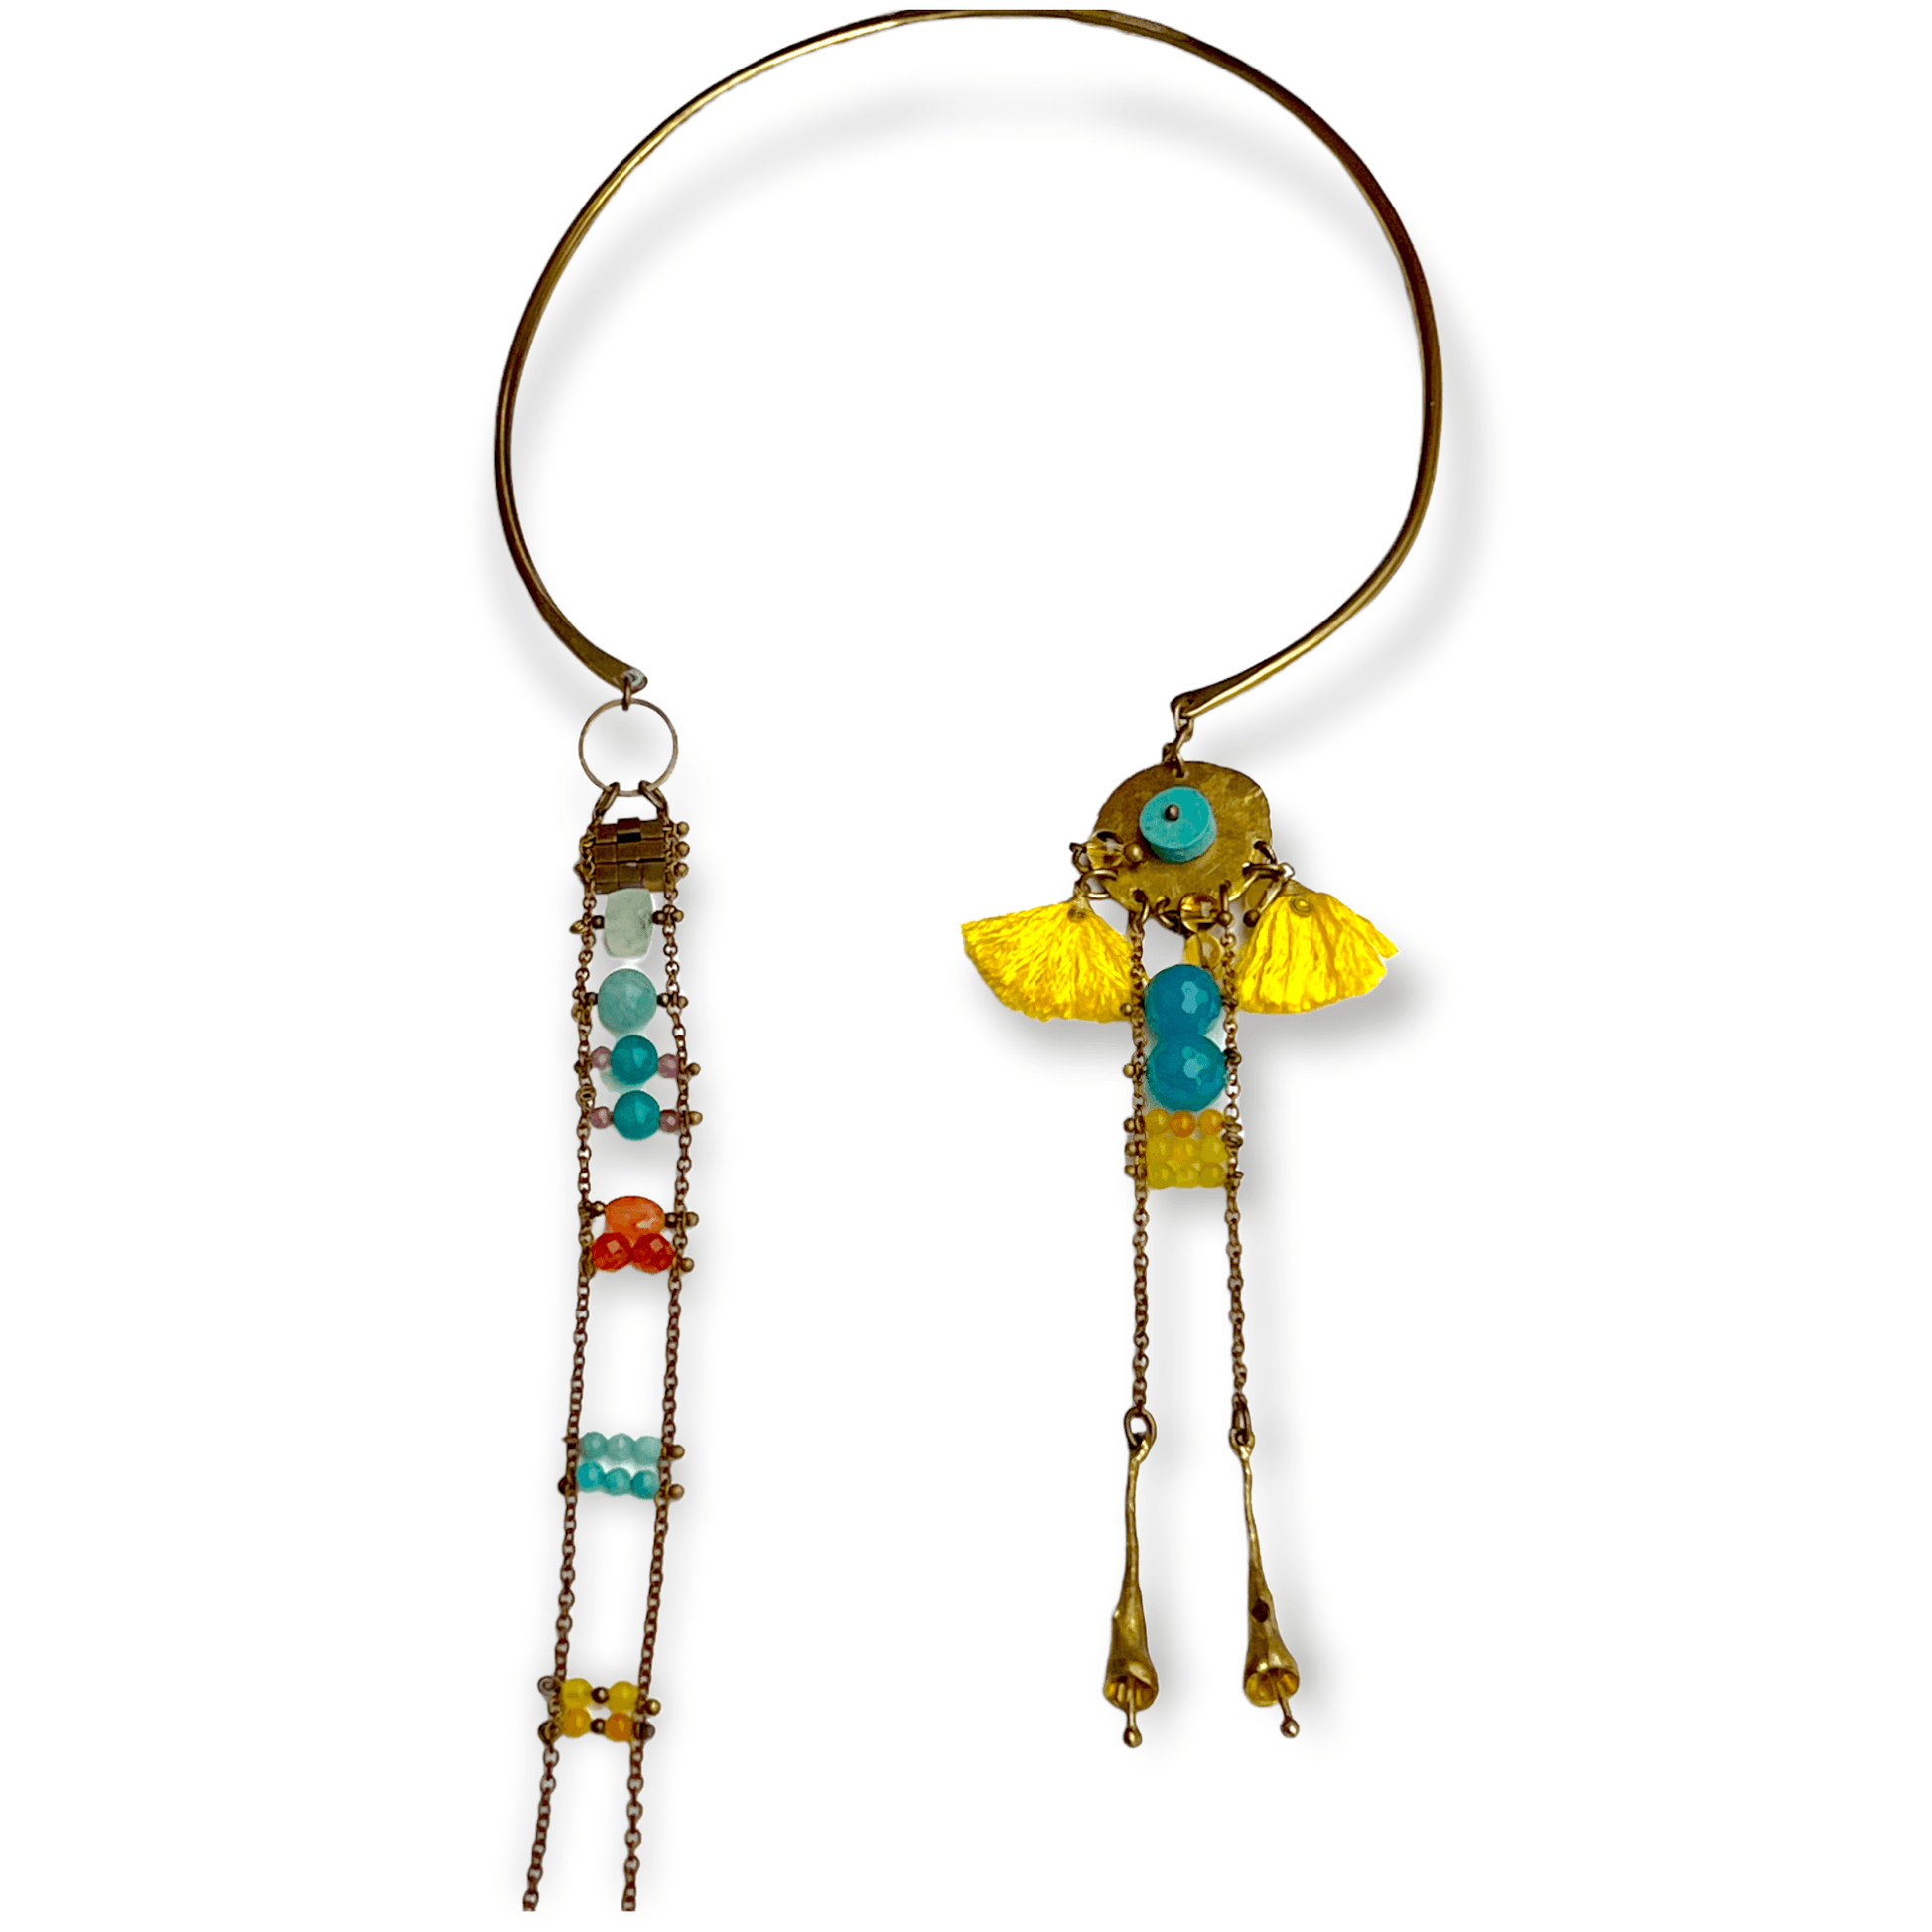 Tribal choker length necklace with dropped detailsSundara Joon